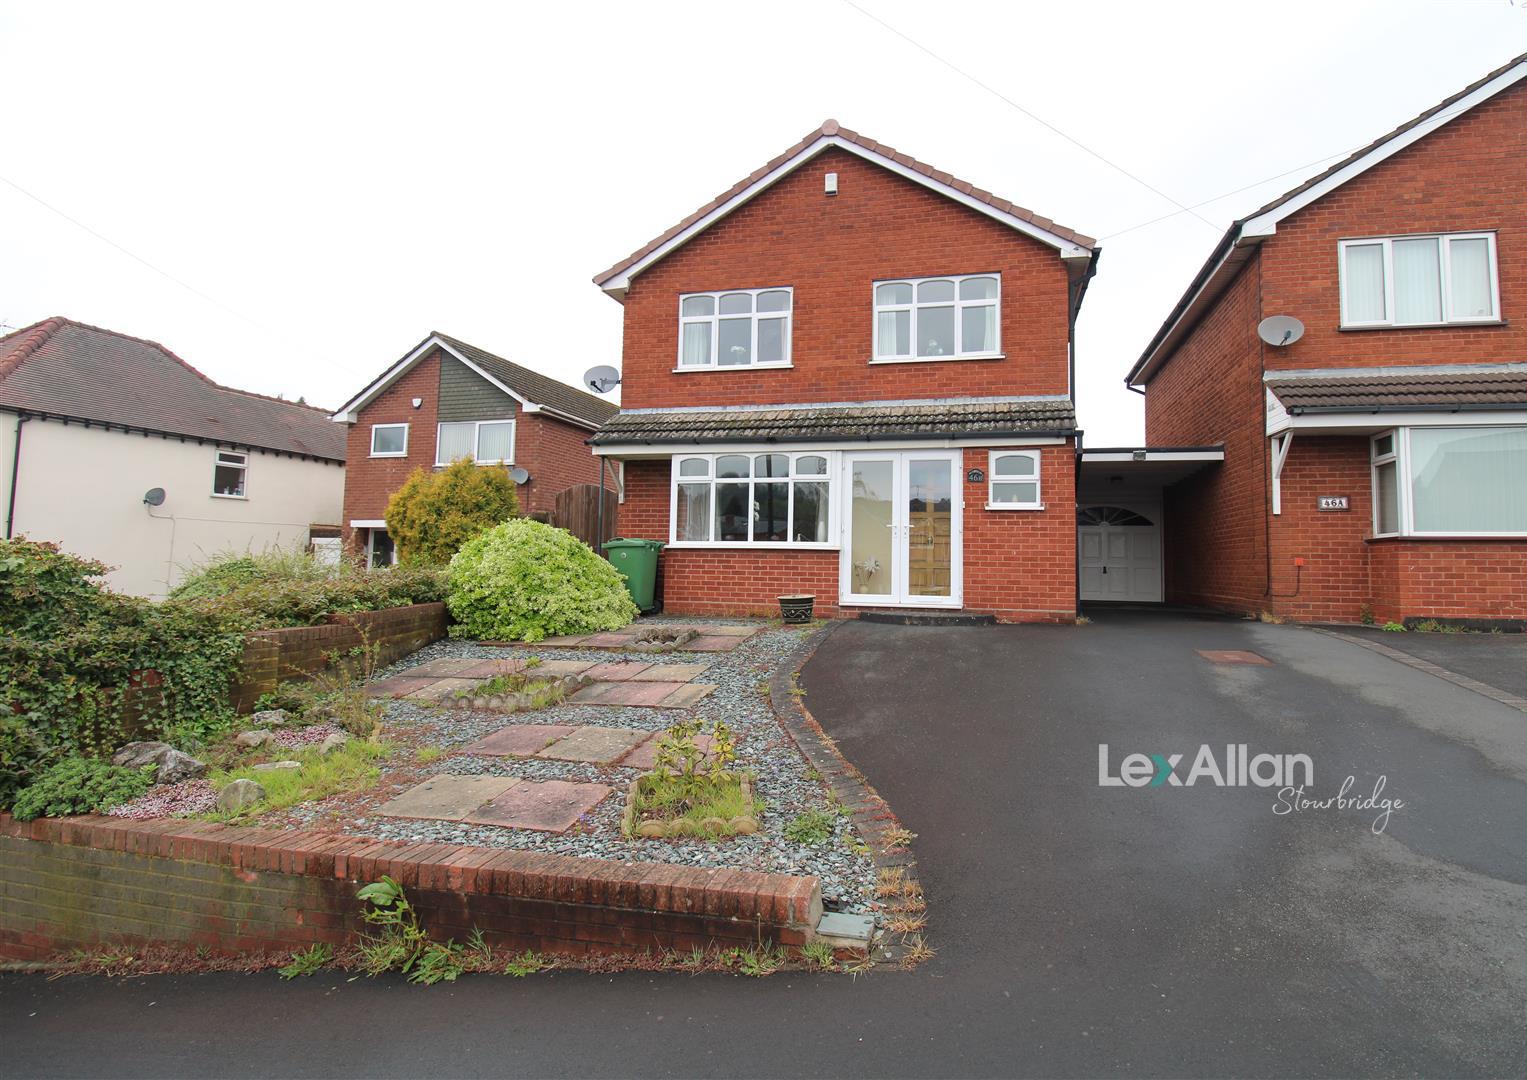 3 bed  for sale in Pedmore Road, Stourbridge, DY9 